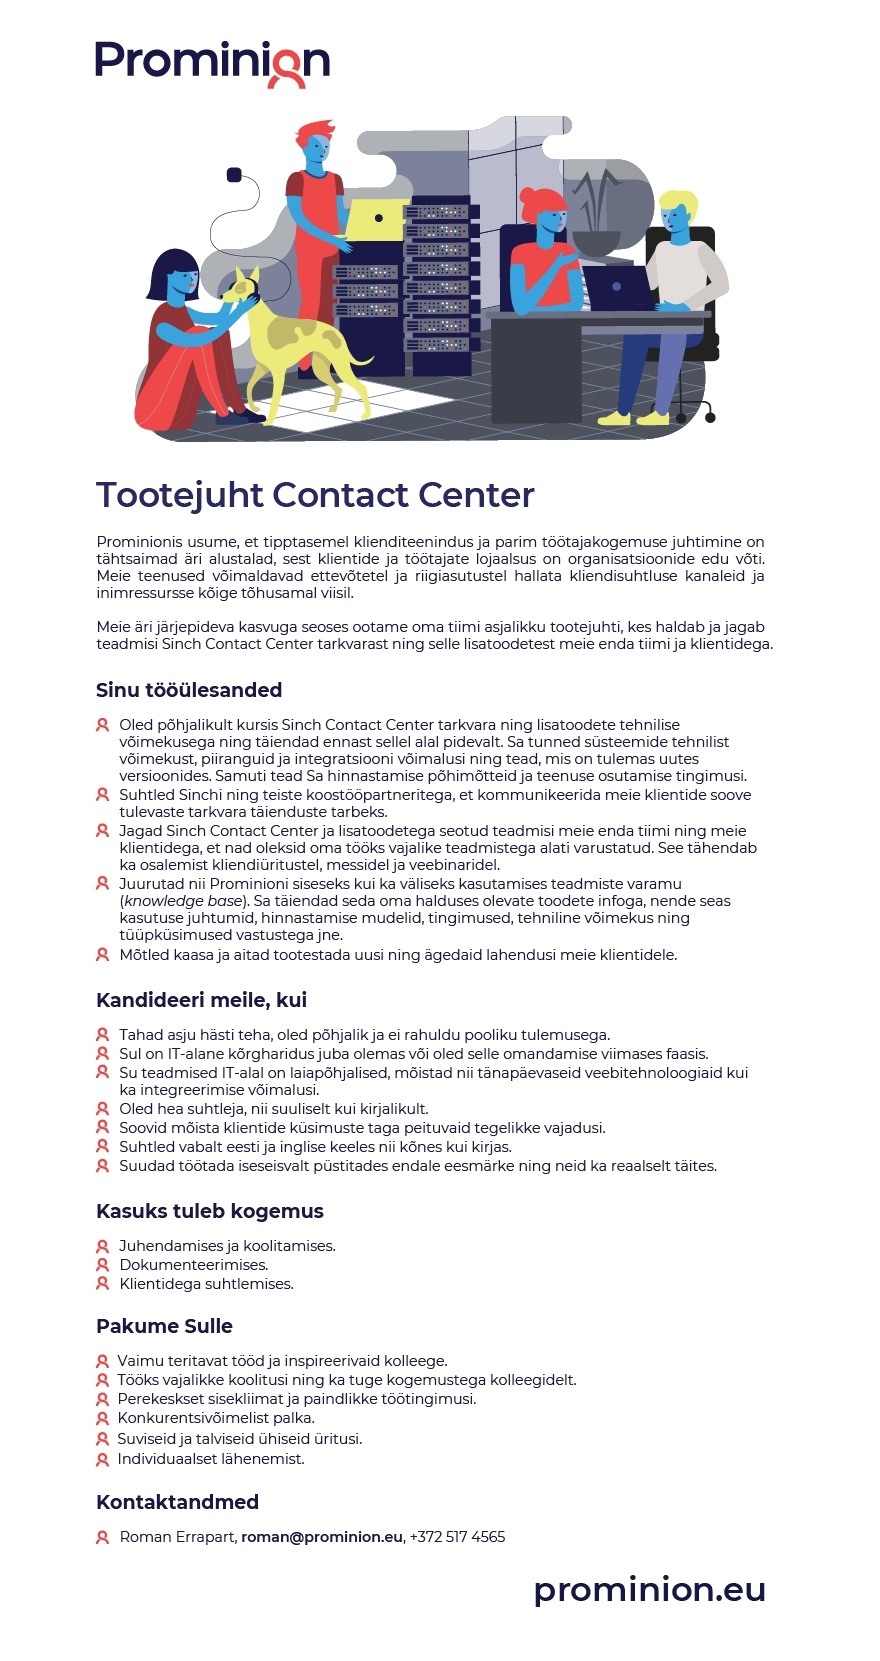 Prominion OÜ Tootejuht Contact Center